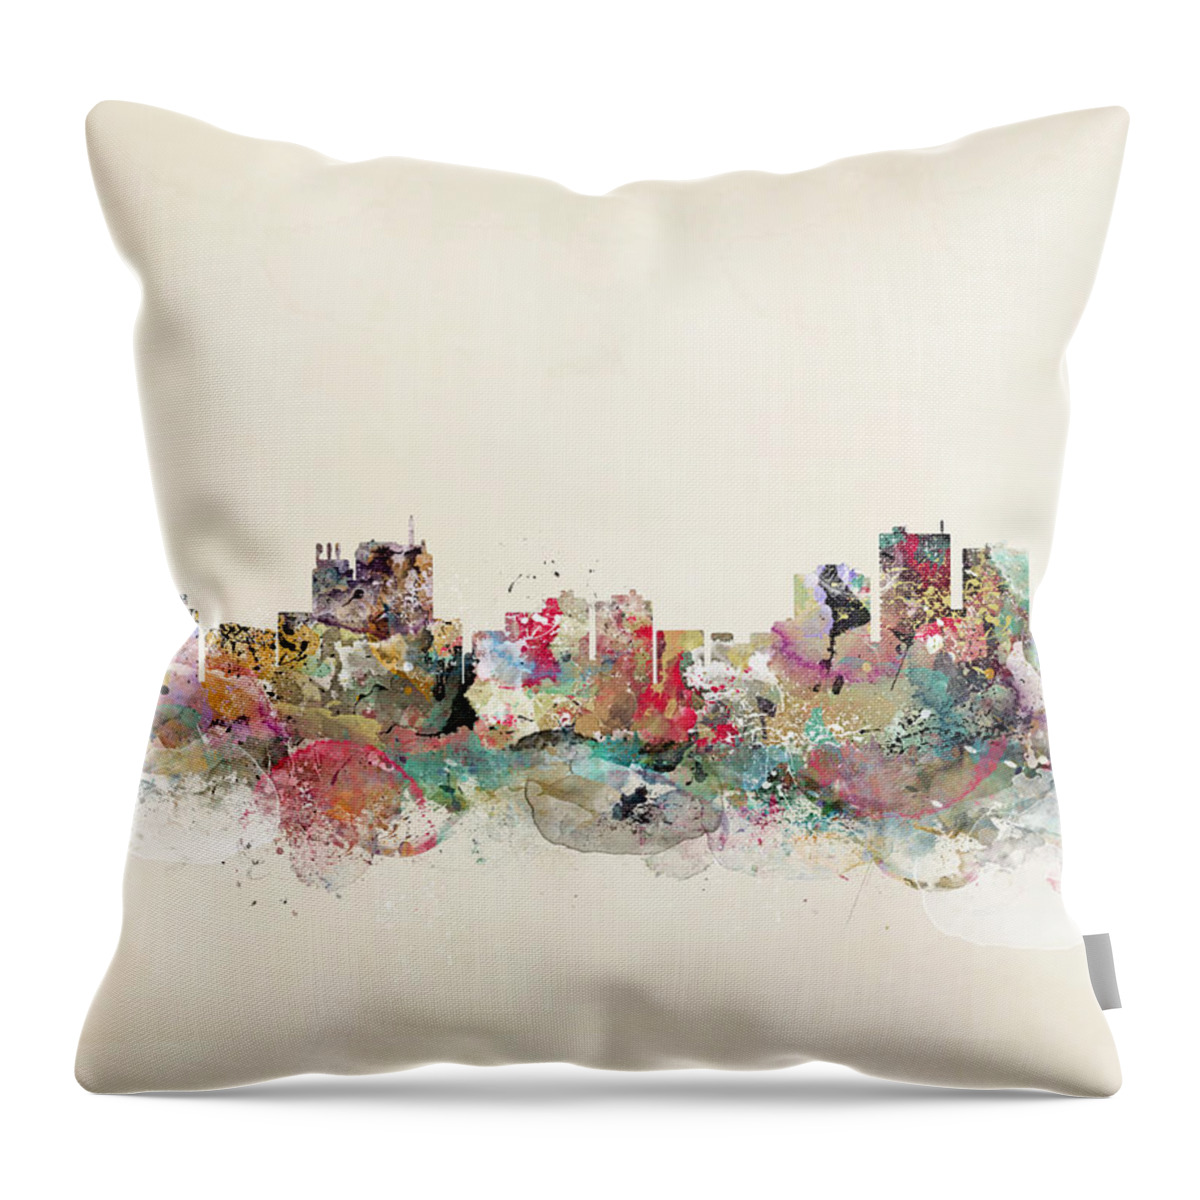 Anchorage Alaska Throw Pillow featuring the painting Anchorage Alaska by Bri Buckley